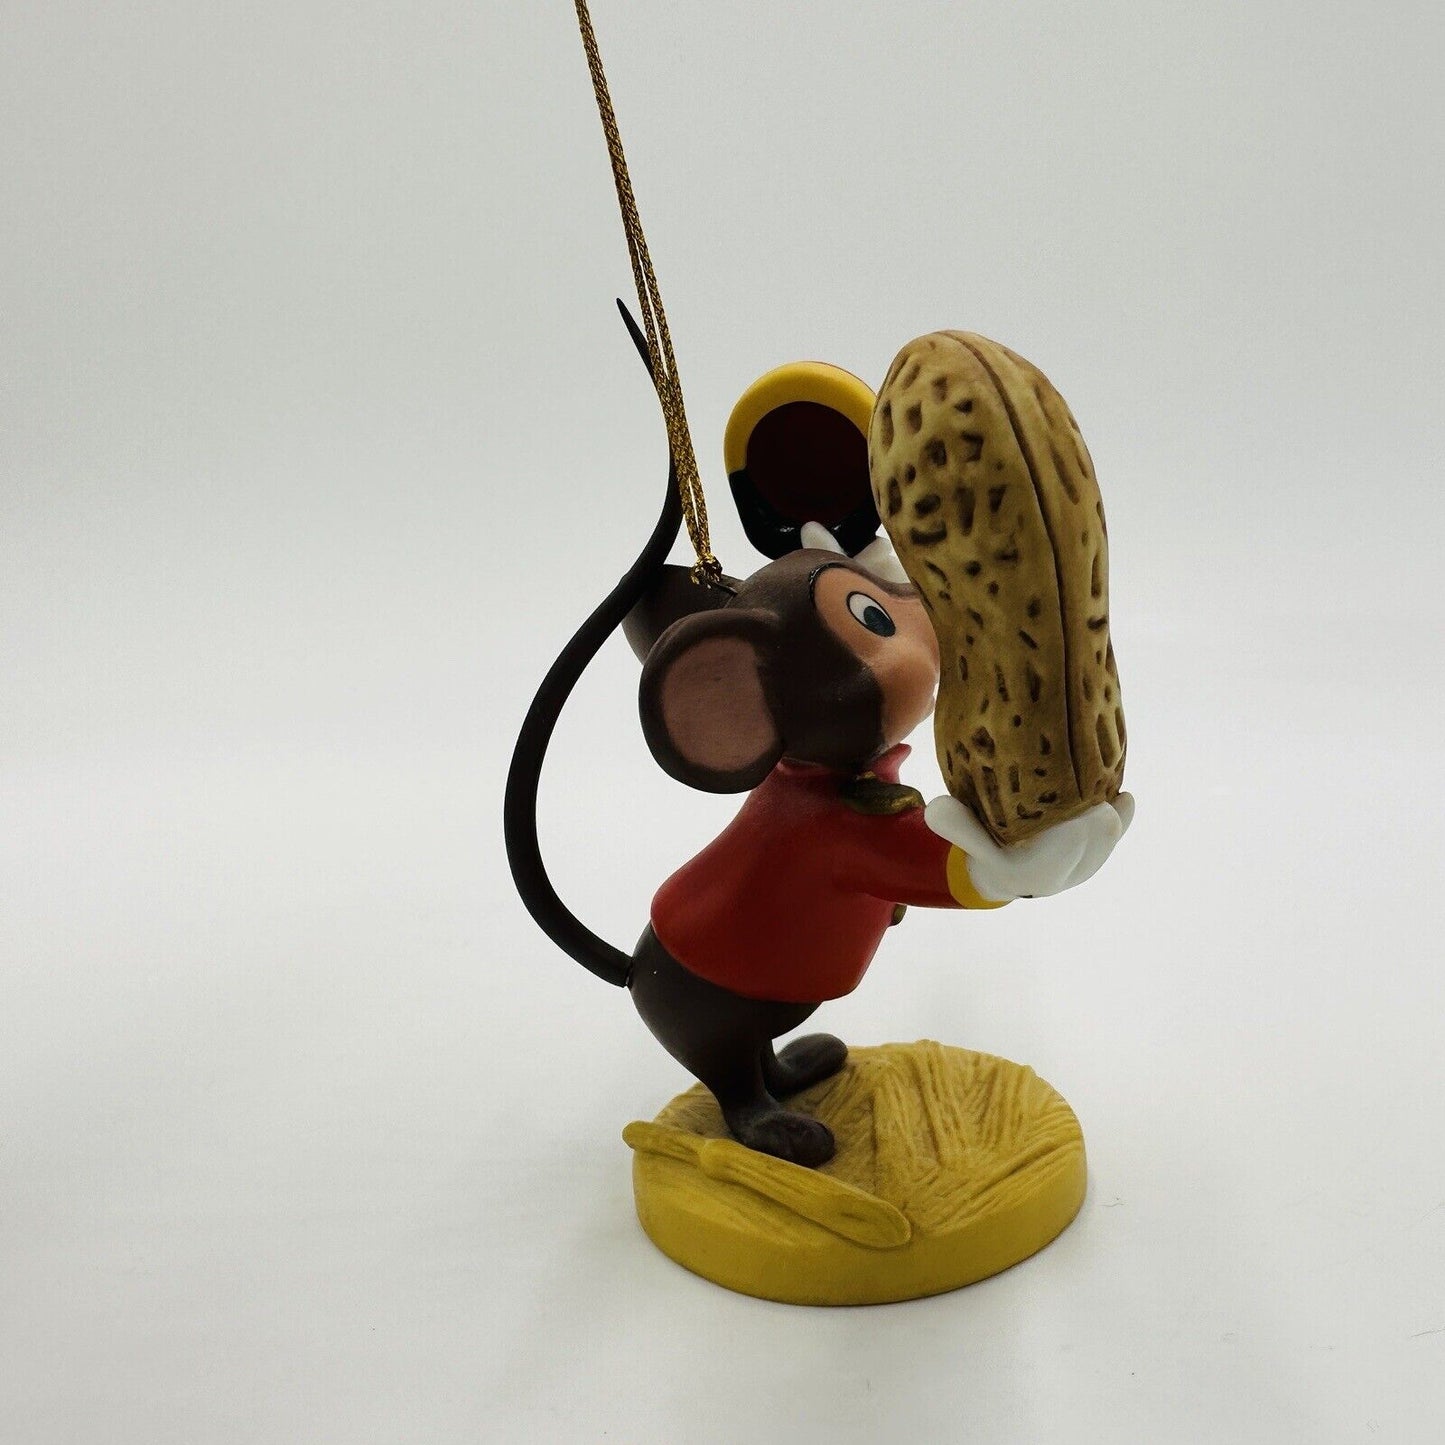 WDCC Timothy Mouse Ornament Figurine offering friendship 1998 vintage